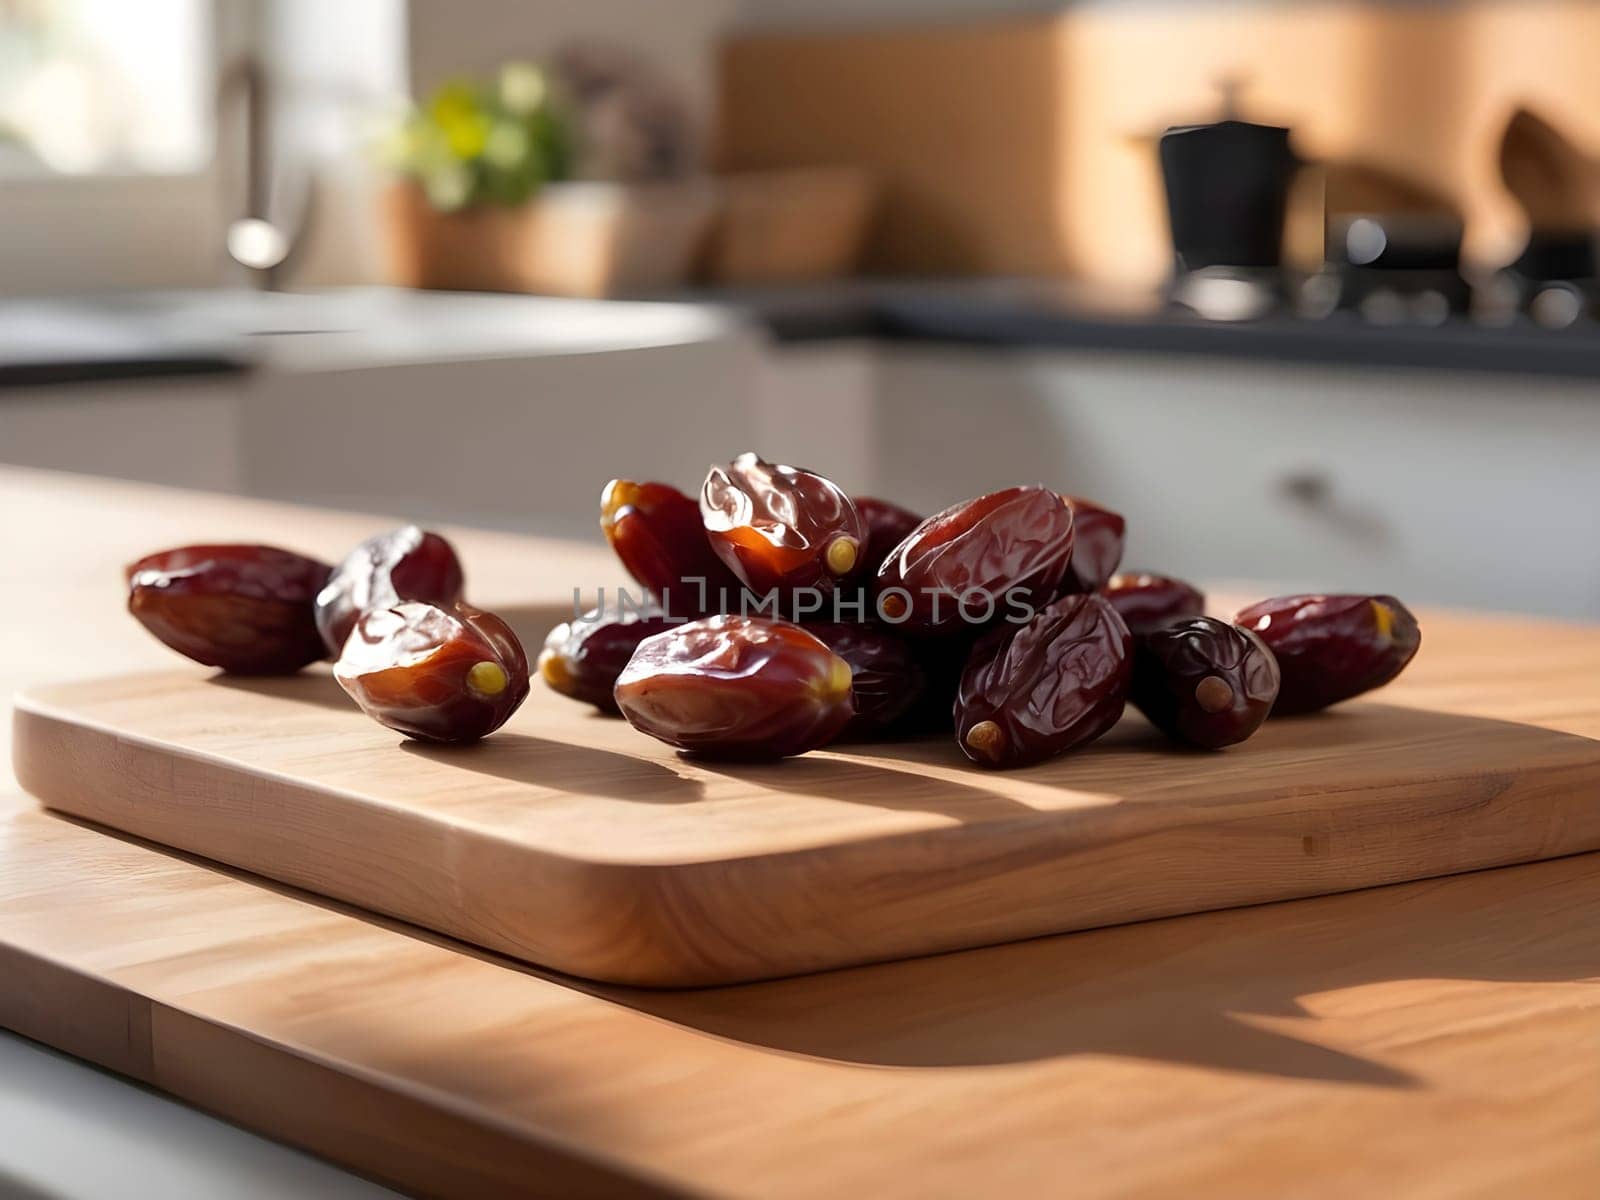 Sundrenched Dates: A Rustic Presentation on a Wooden Board in the Afternoon Glow.